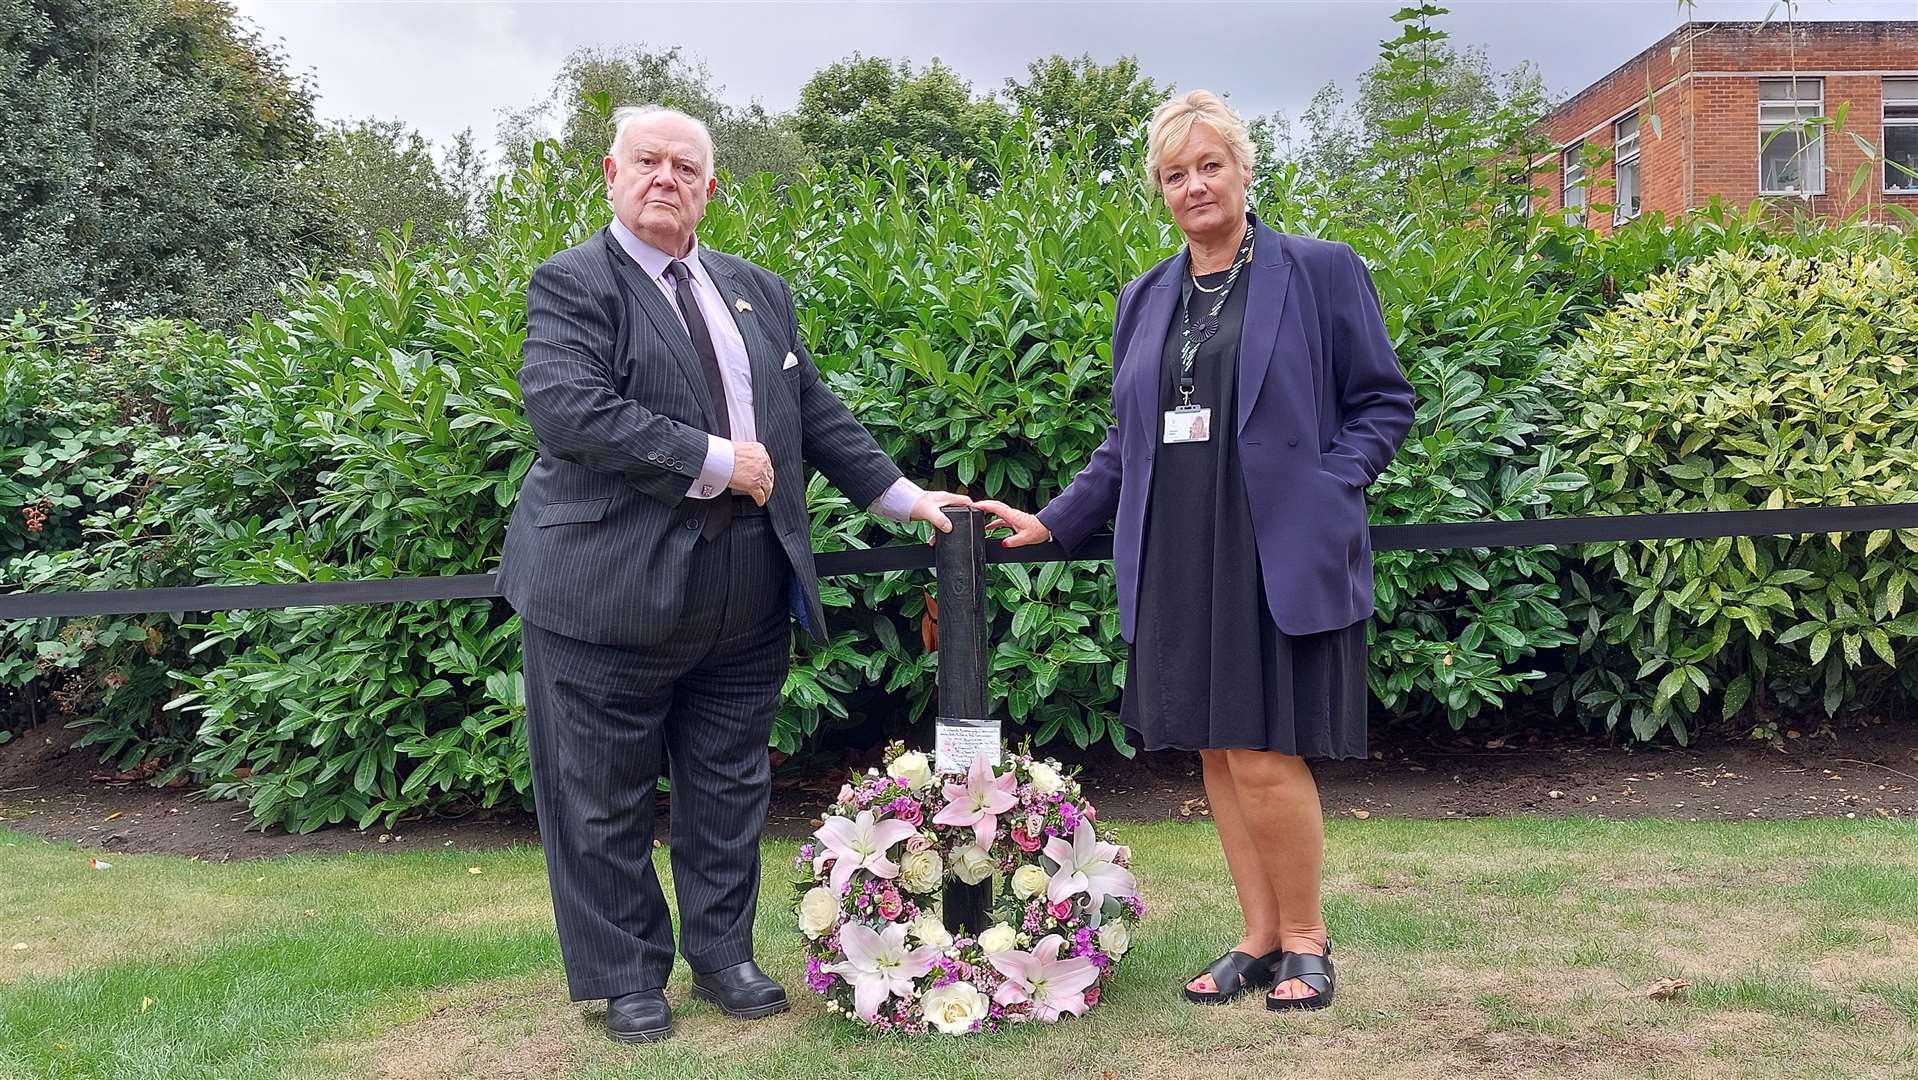 ABC leader Cllr Gerry Clarkson and CEO Tracey Kerly laying the first wreath